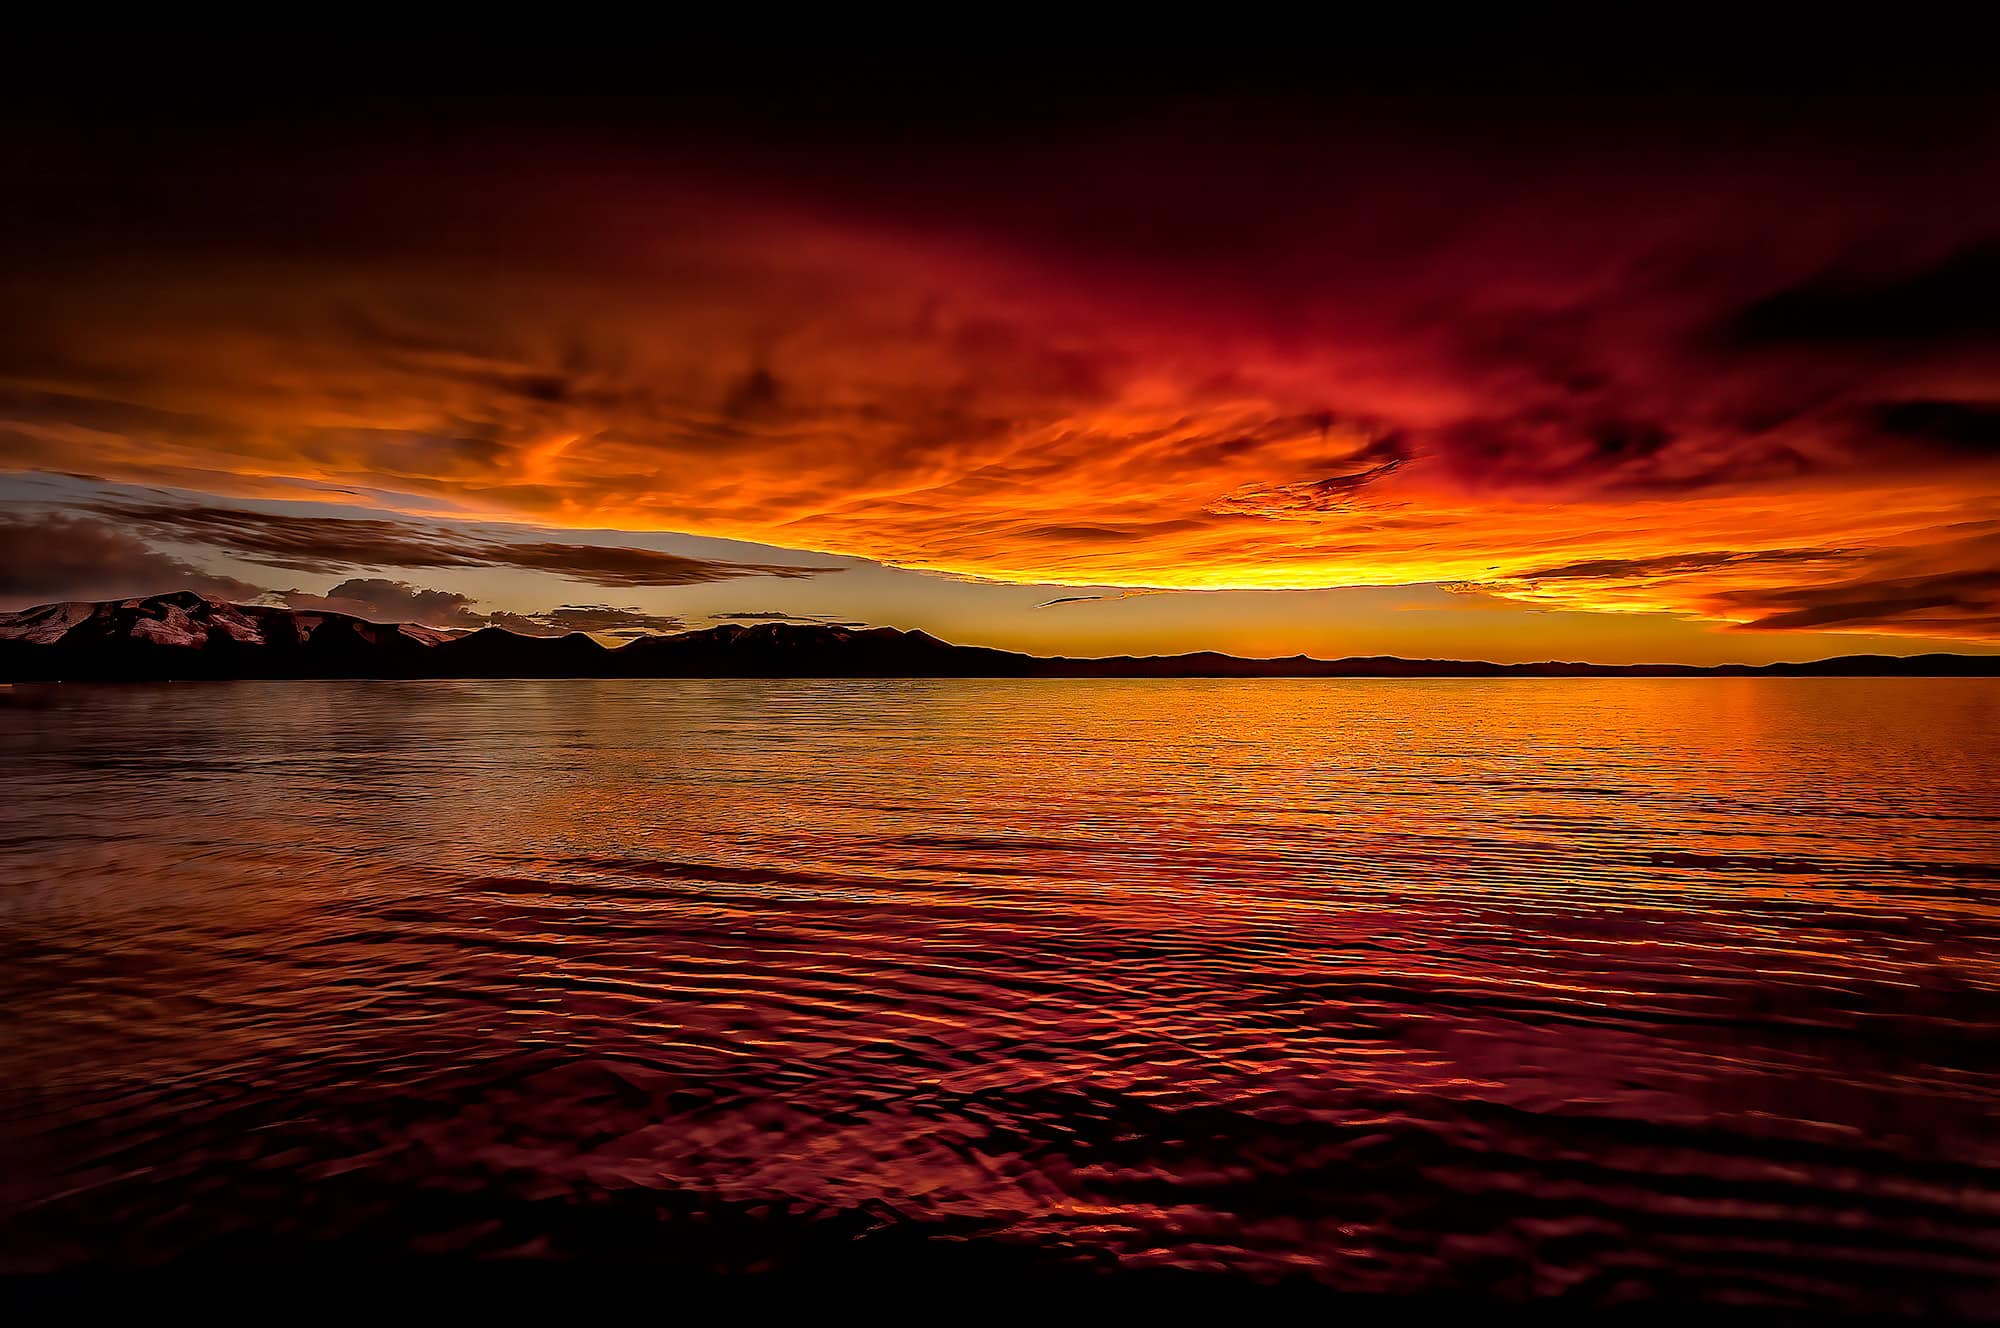 A spectacular sunset looking across Lake Tahoe